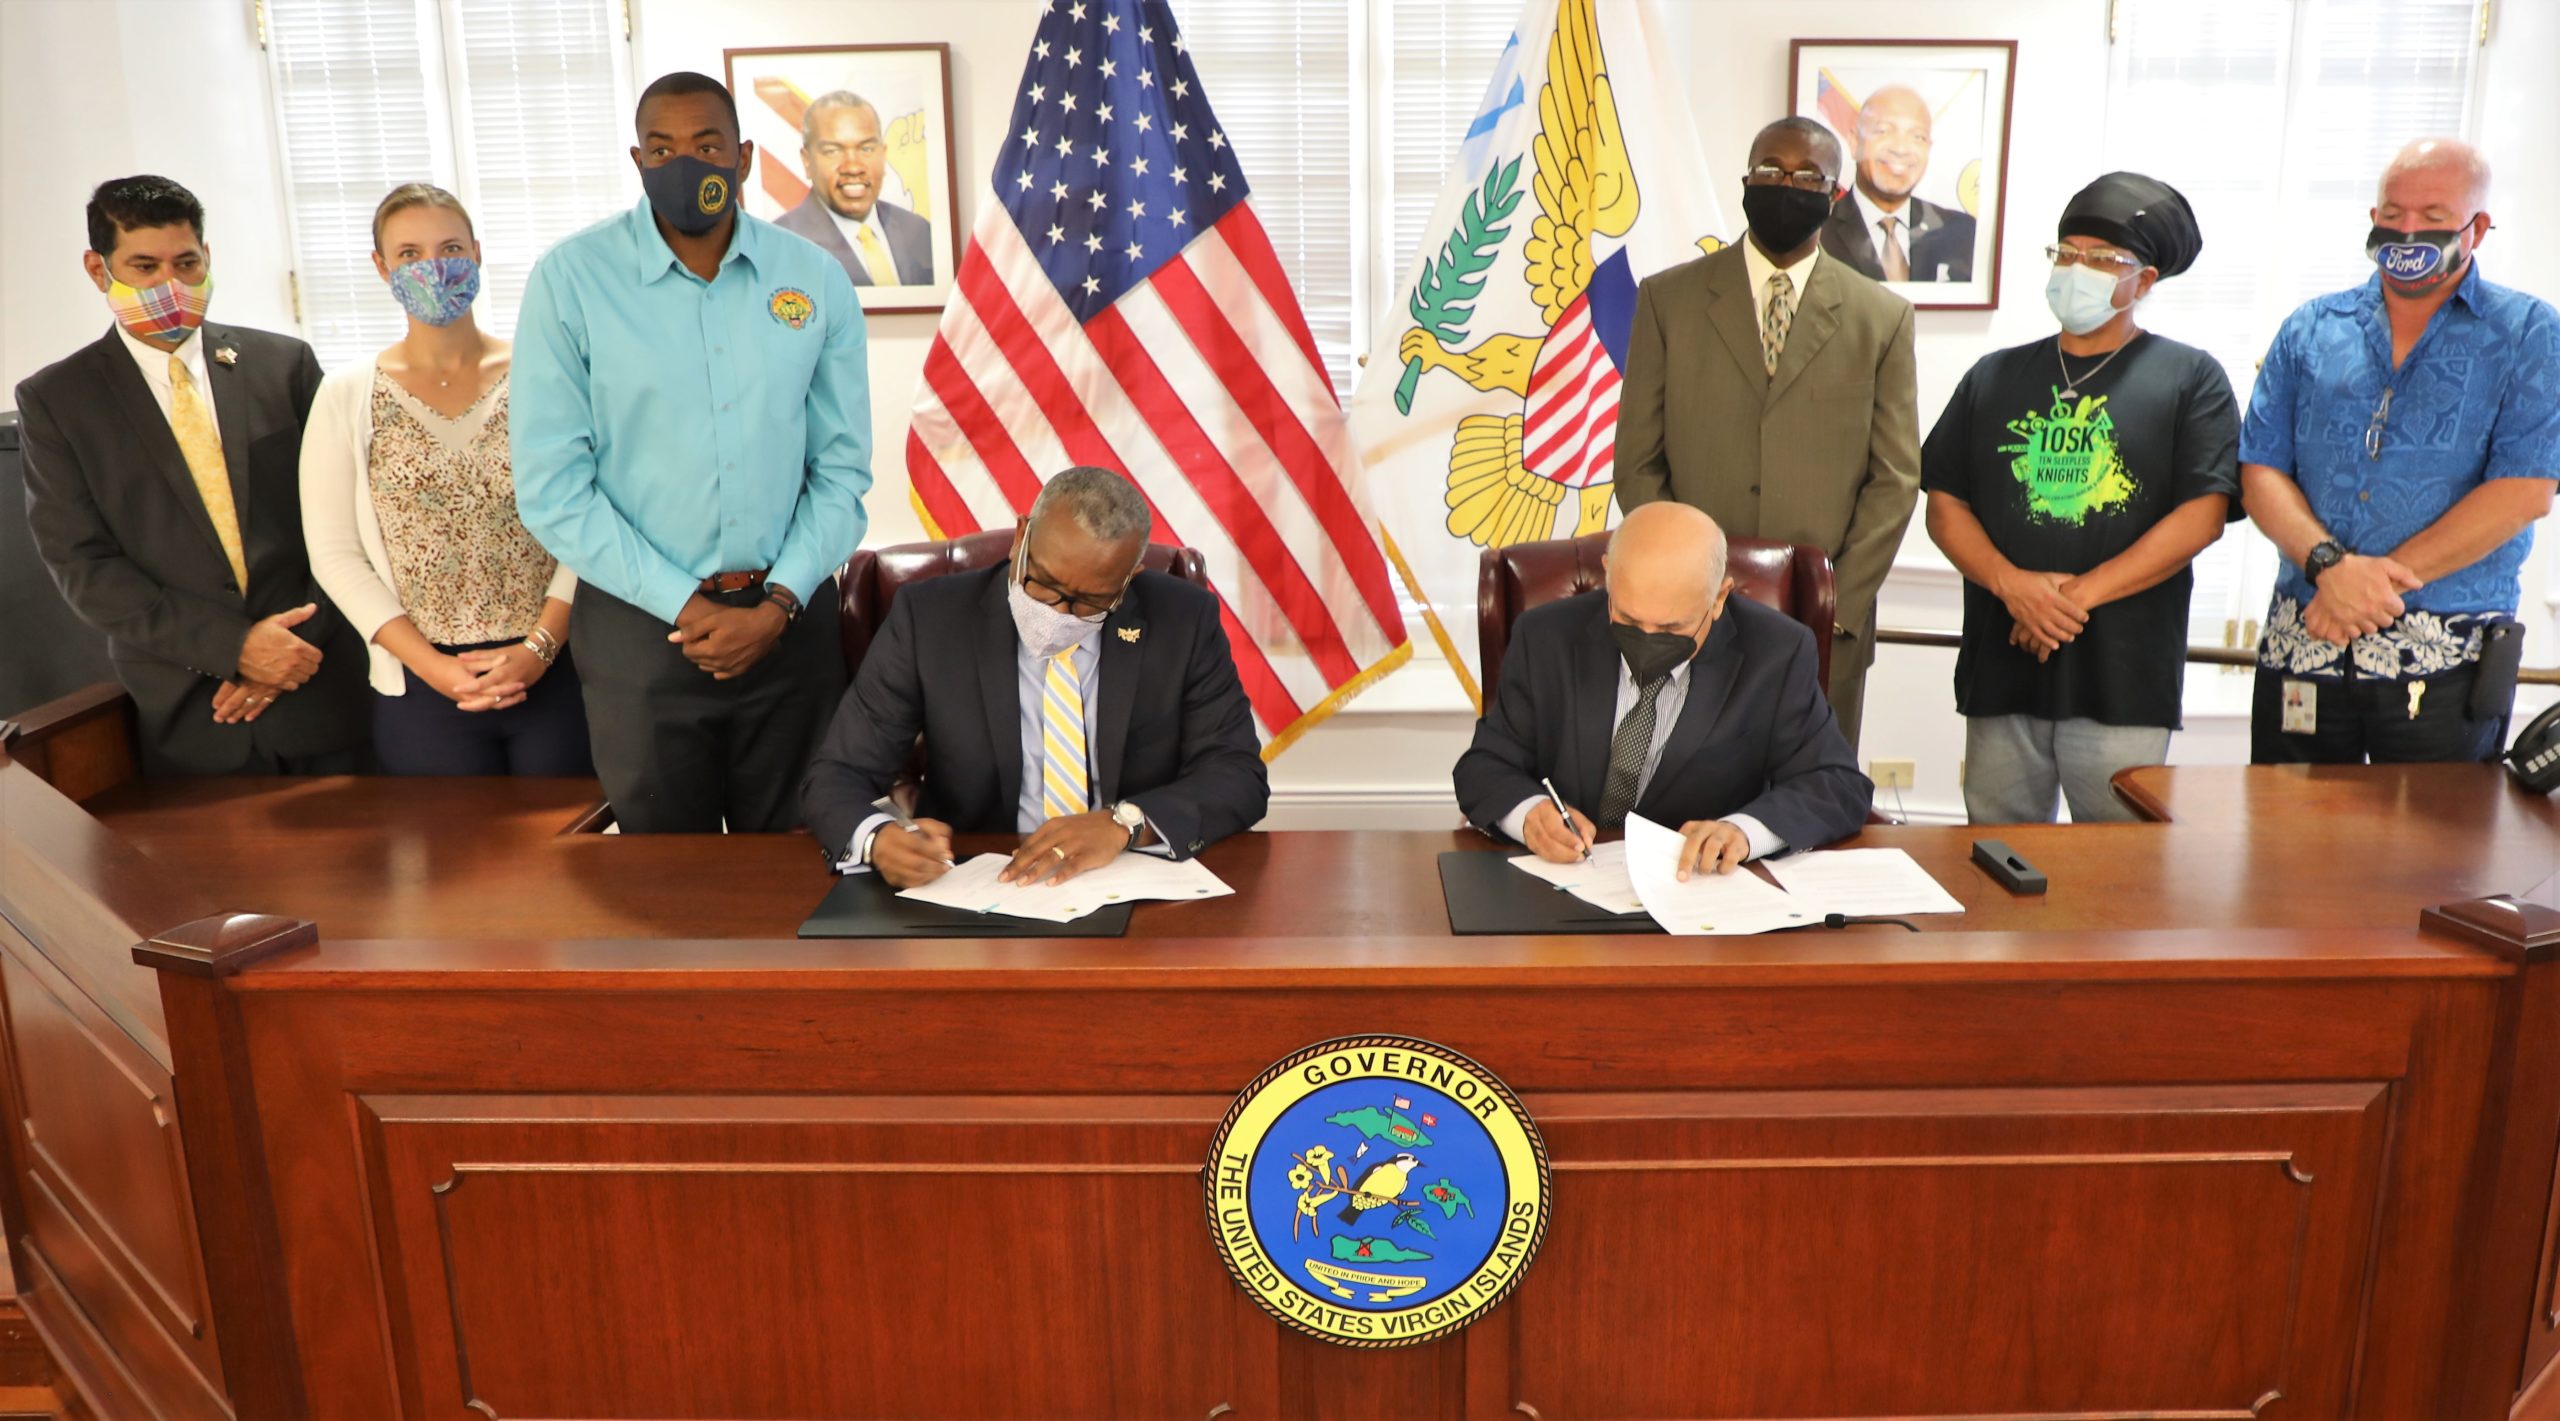 Gov. Albert Bryan Jr. and Jehangir Zakaria. vice president of Engineering/Energy for Renaissance Group LLLP, sign the agreement for a 2.5- acre donation of land to be used for the construction of a drag racing facility on St. Croix while members of the Bryan-Roach administration and the Caribbean Drag Racing Association look on. (Photo by Government House)